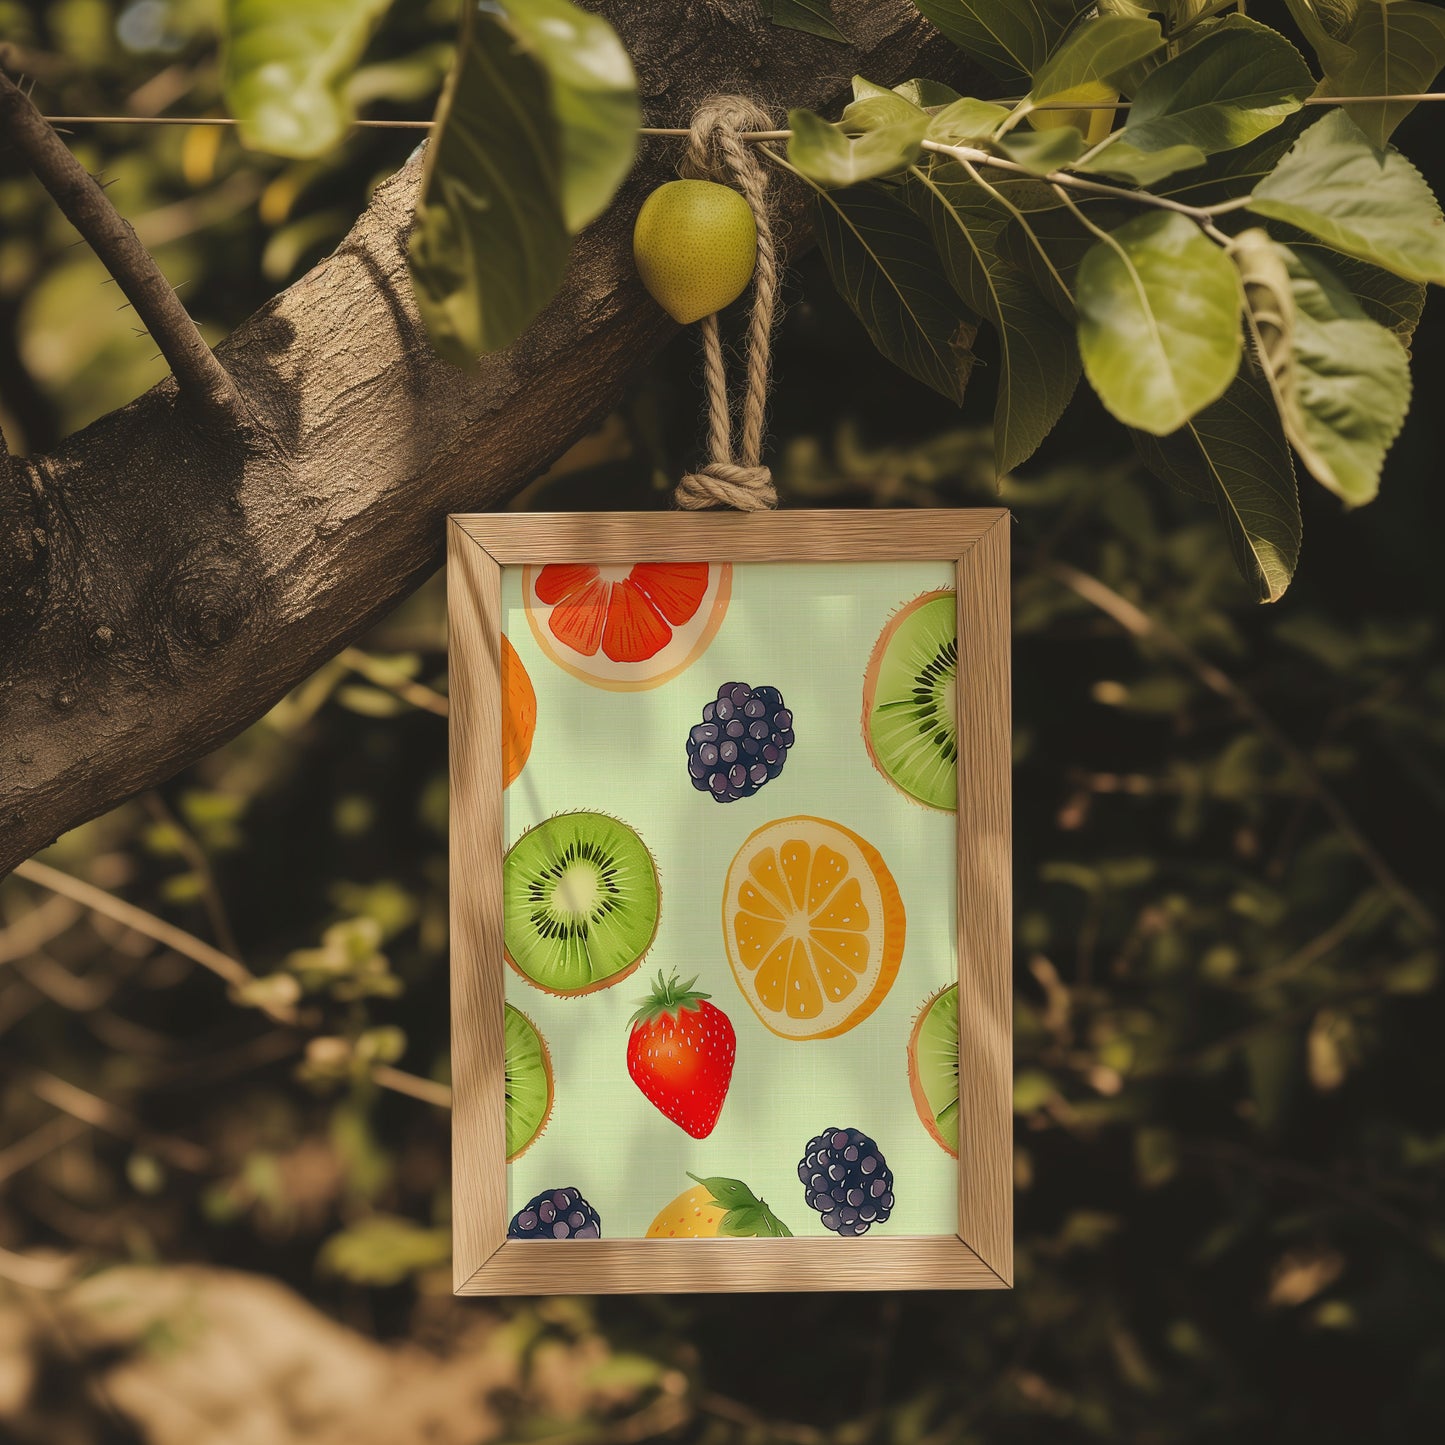 A framed picture of various fruits hanging from a tree branch.